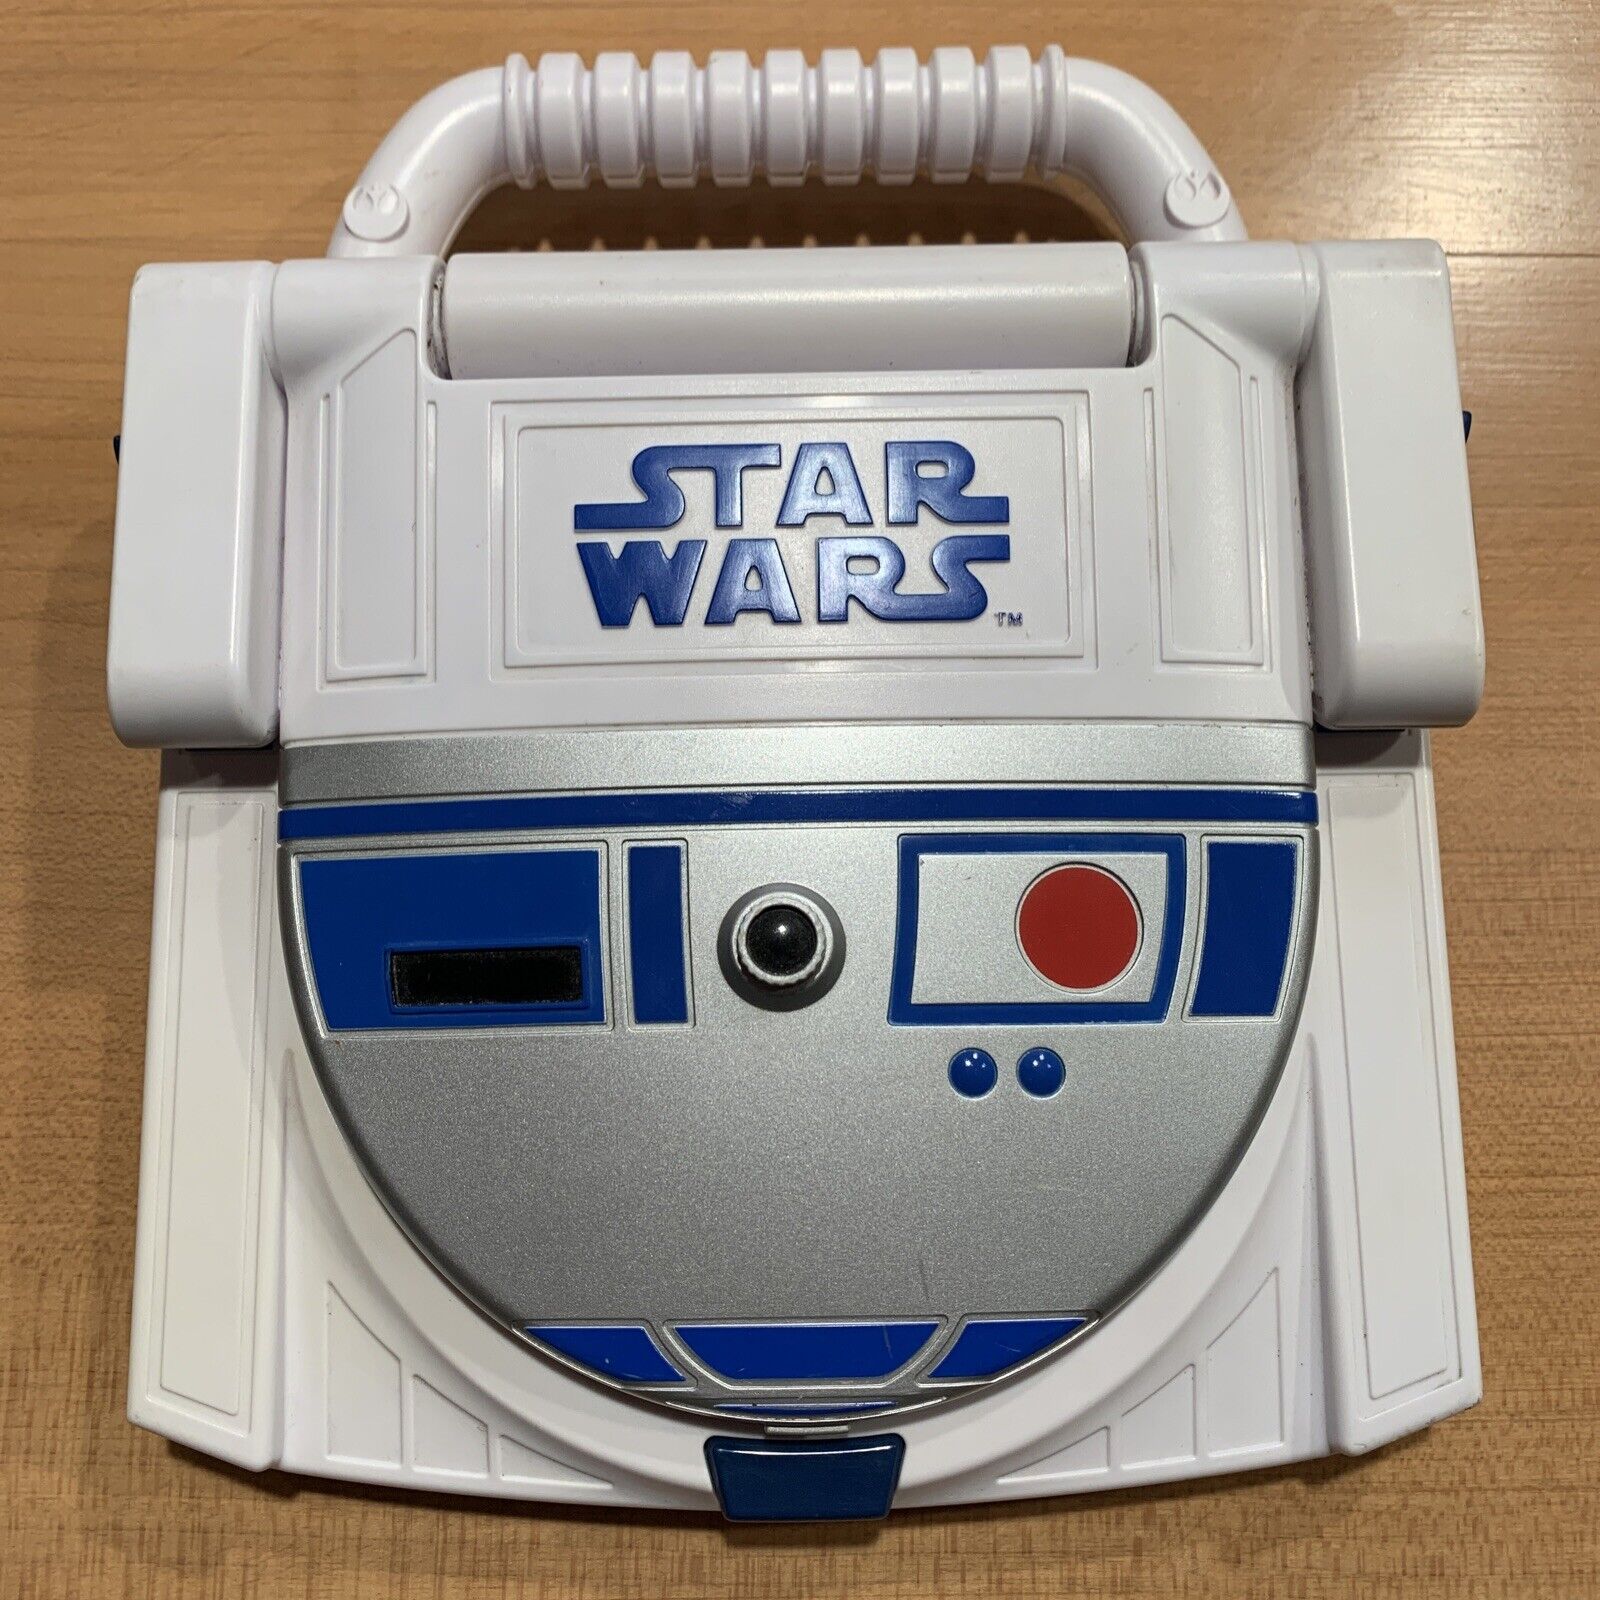 Star Wars R2D2 Kids Electronic Educational Game .. Works